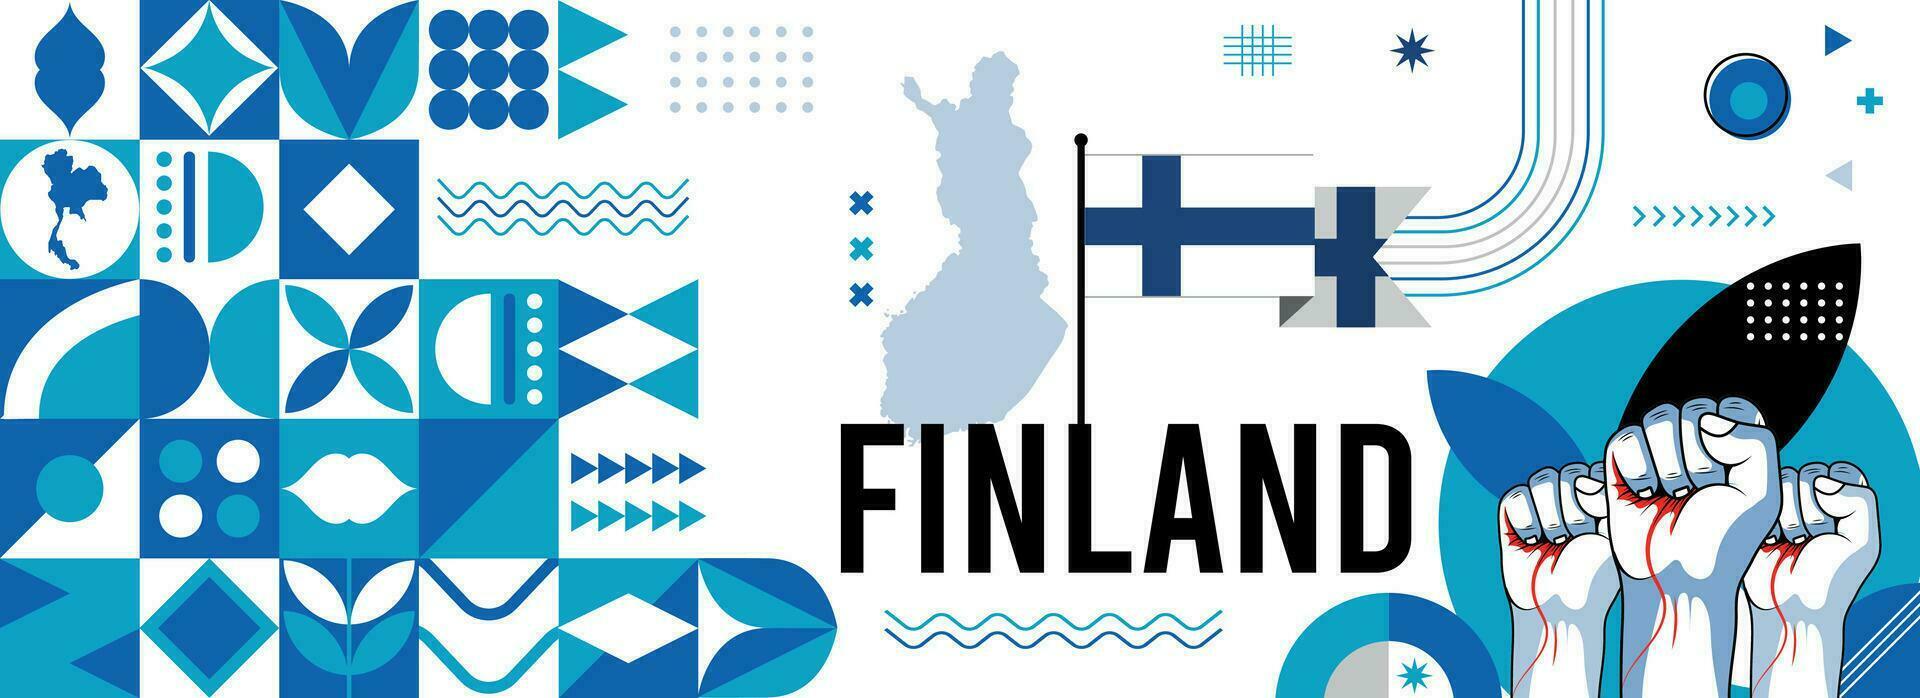 Finland national or independence day banner design for country celebration. Flag and map of Finland with raised fists. Modern retro design with abstract geometric icons. Vector illustration.